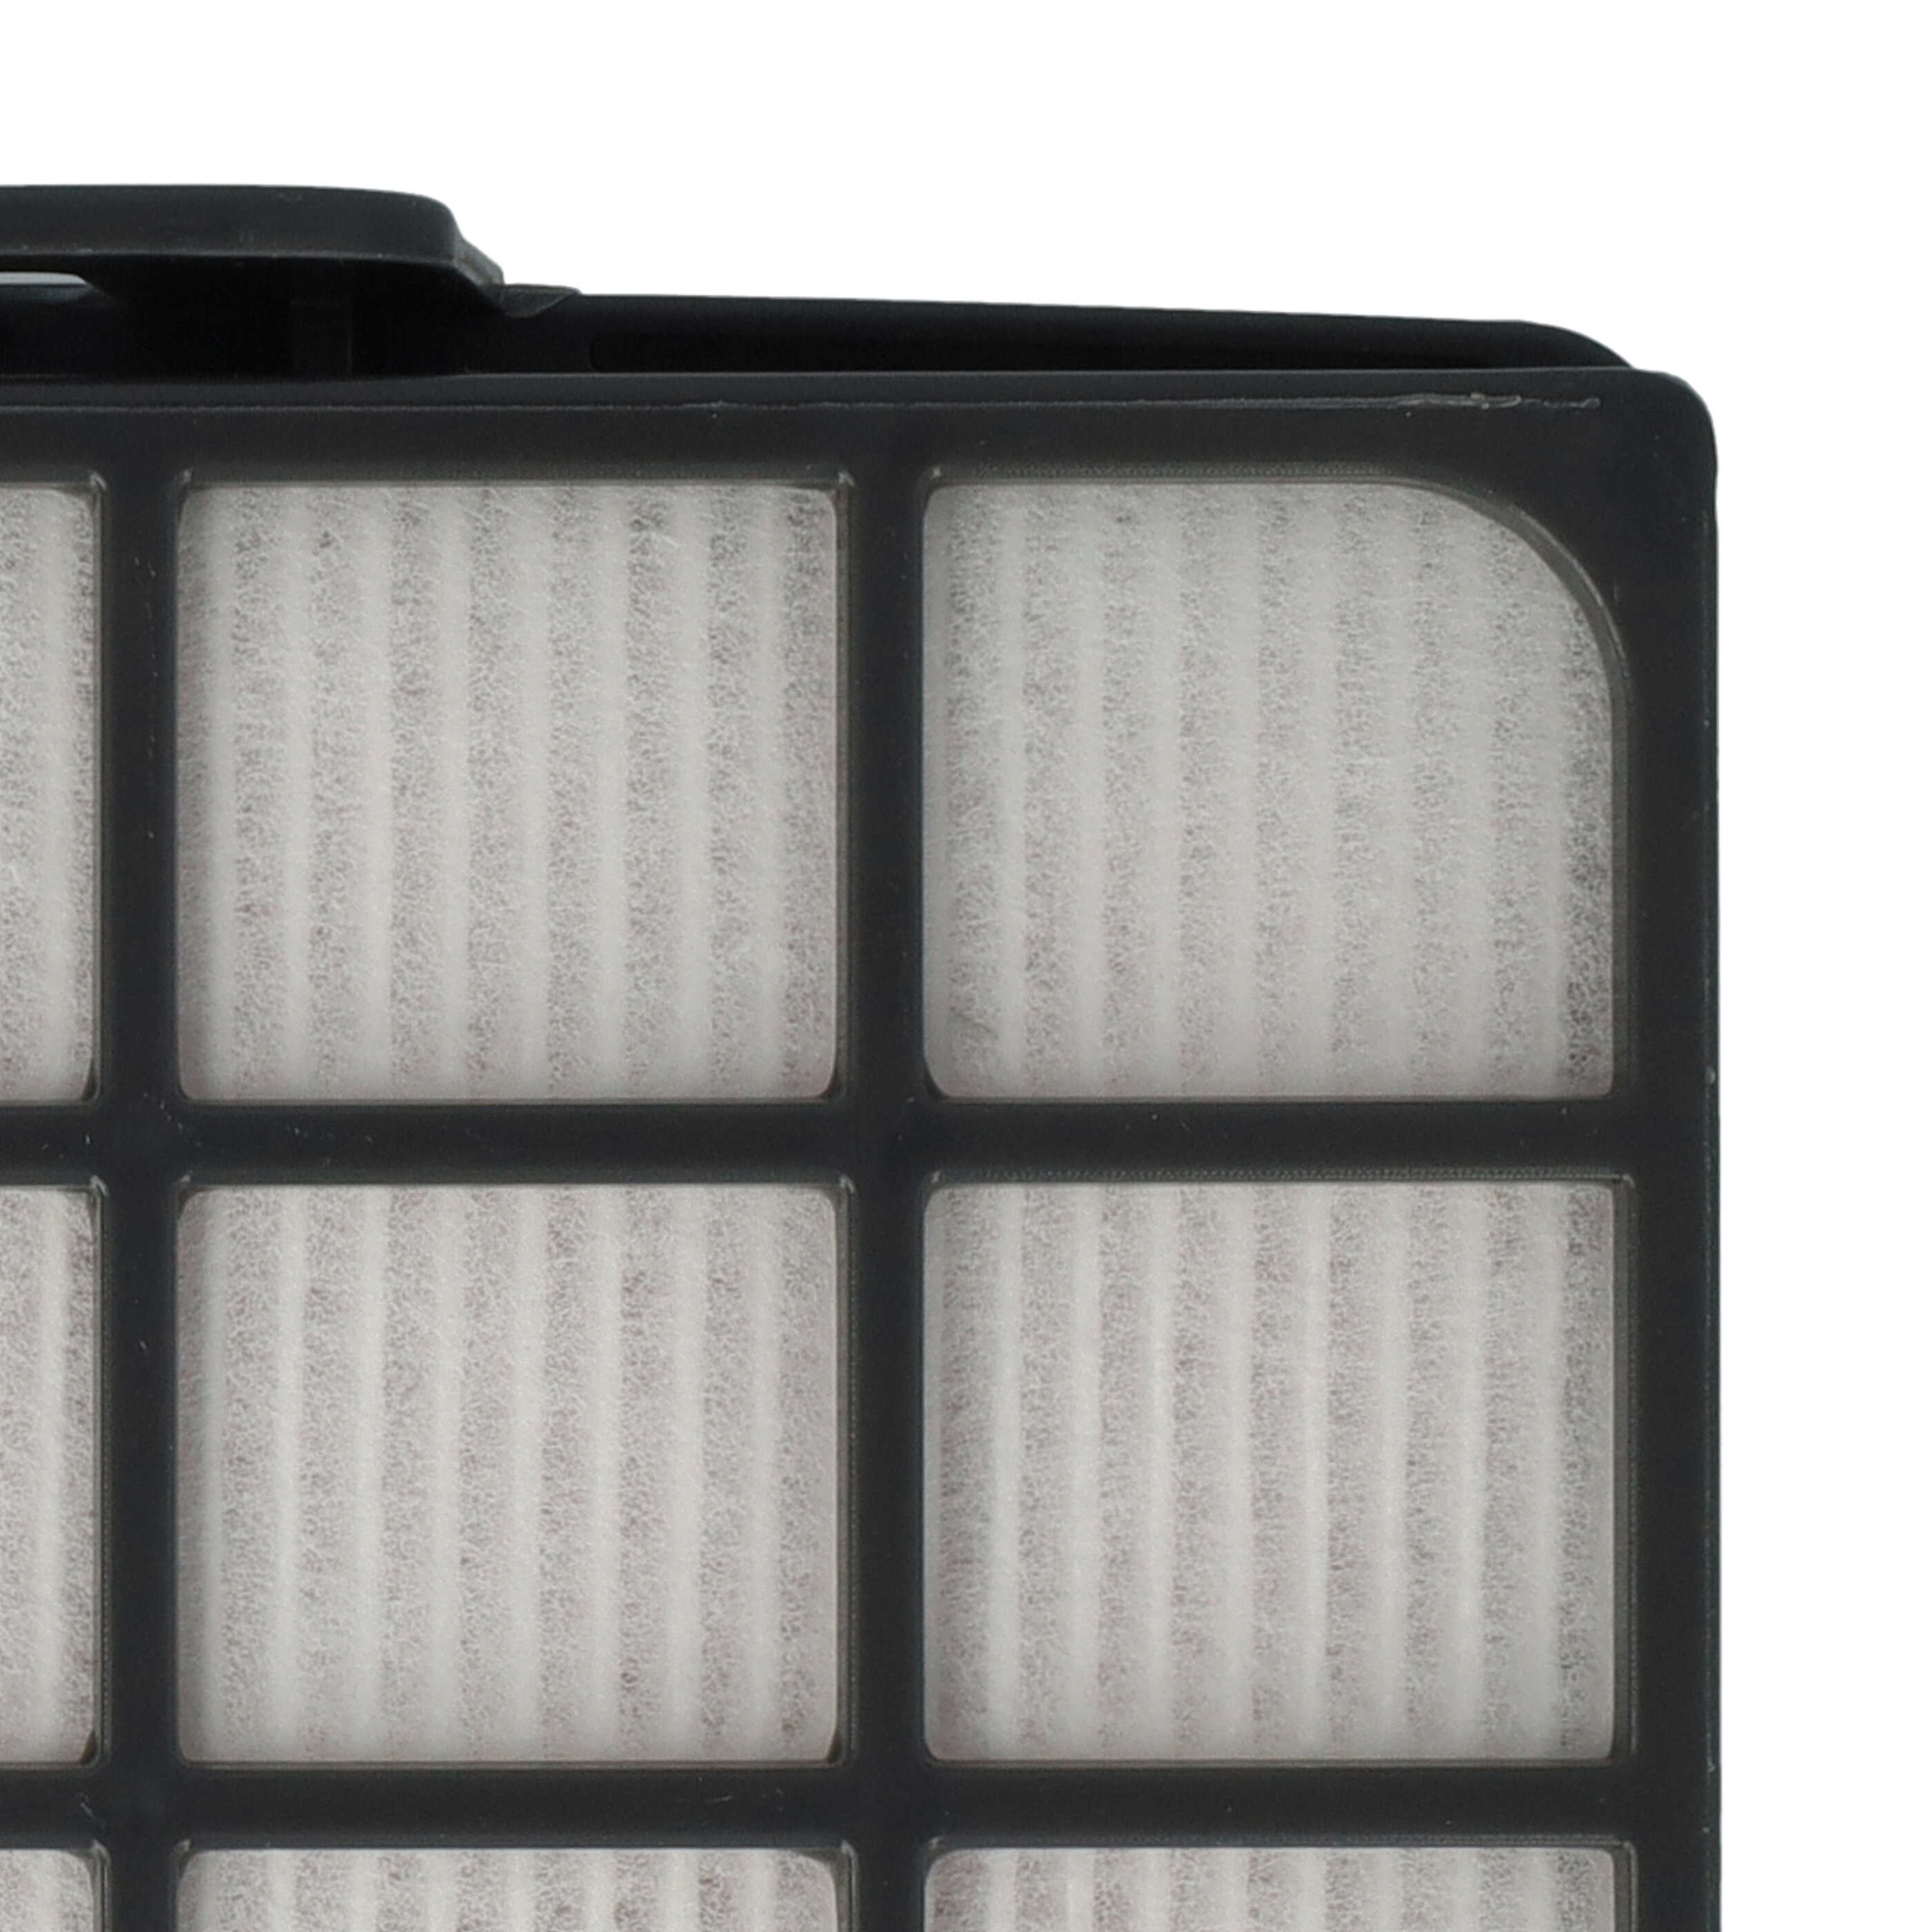 1x exhaust EPA filter replaces Rowenta RS-RT4310 for Rowenta Vacuum Cleaner